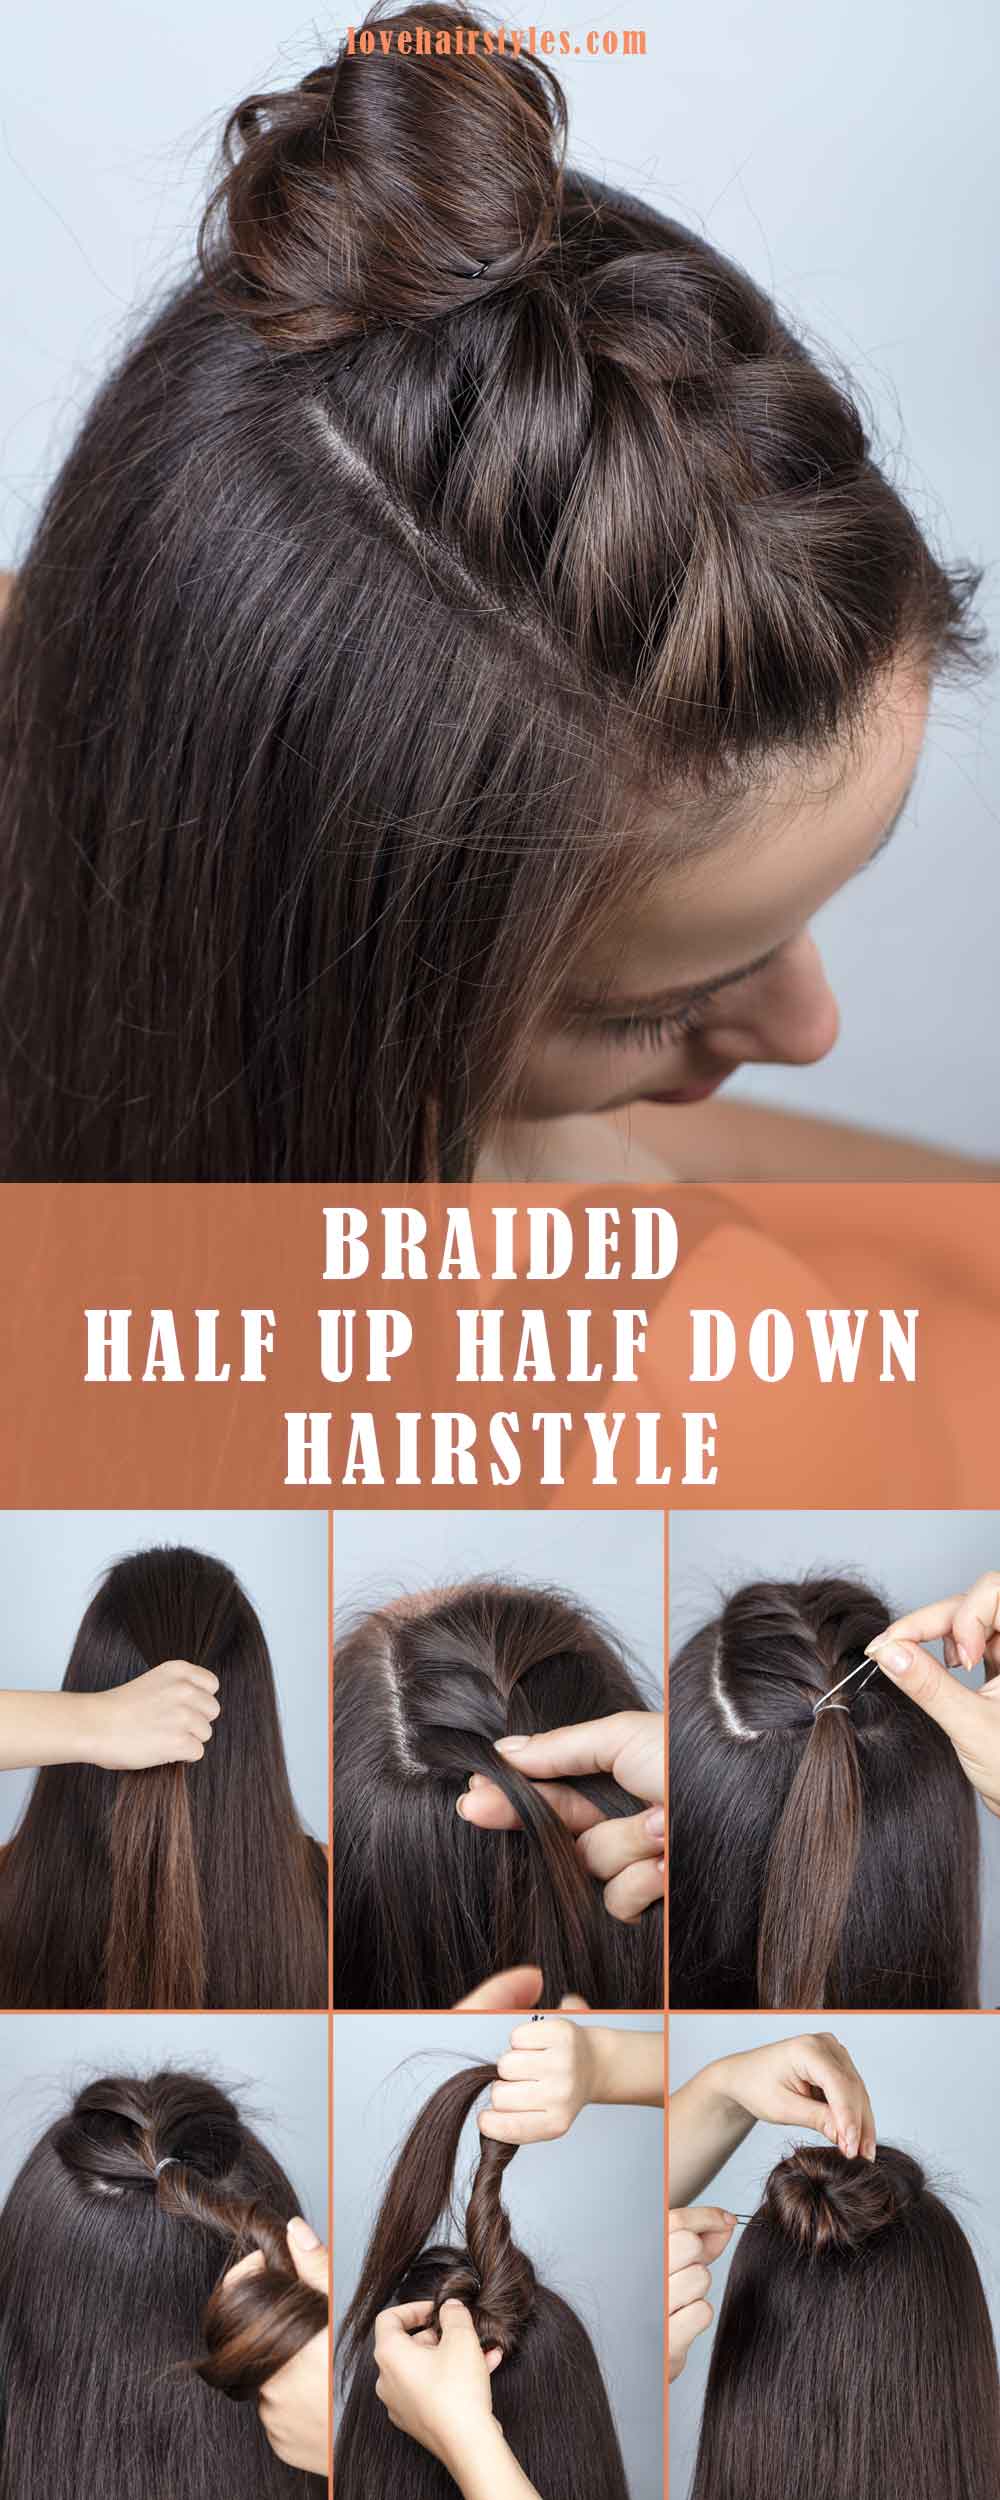 Cute & easy summer hairstyles for long hair with step by step instructions